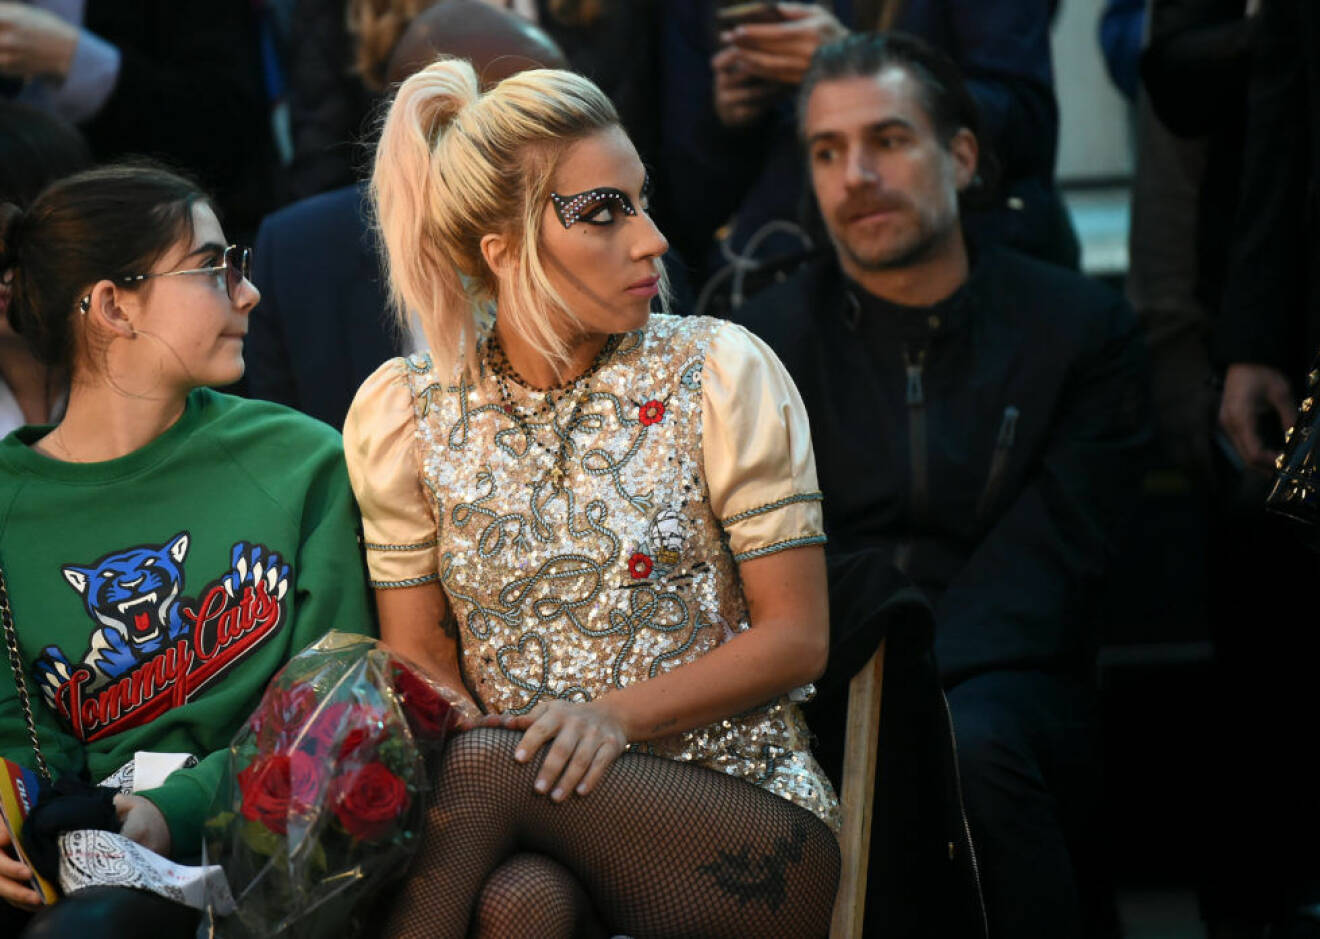 Bella Carino and Lady Gaga in the front row